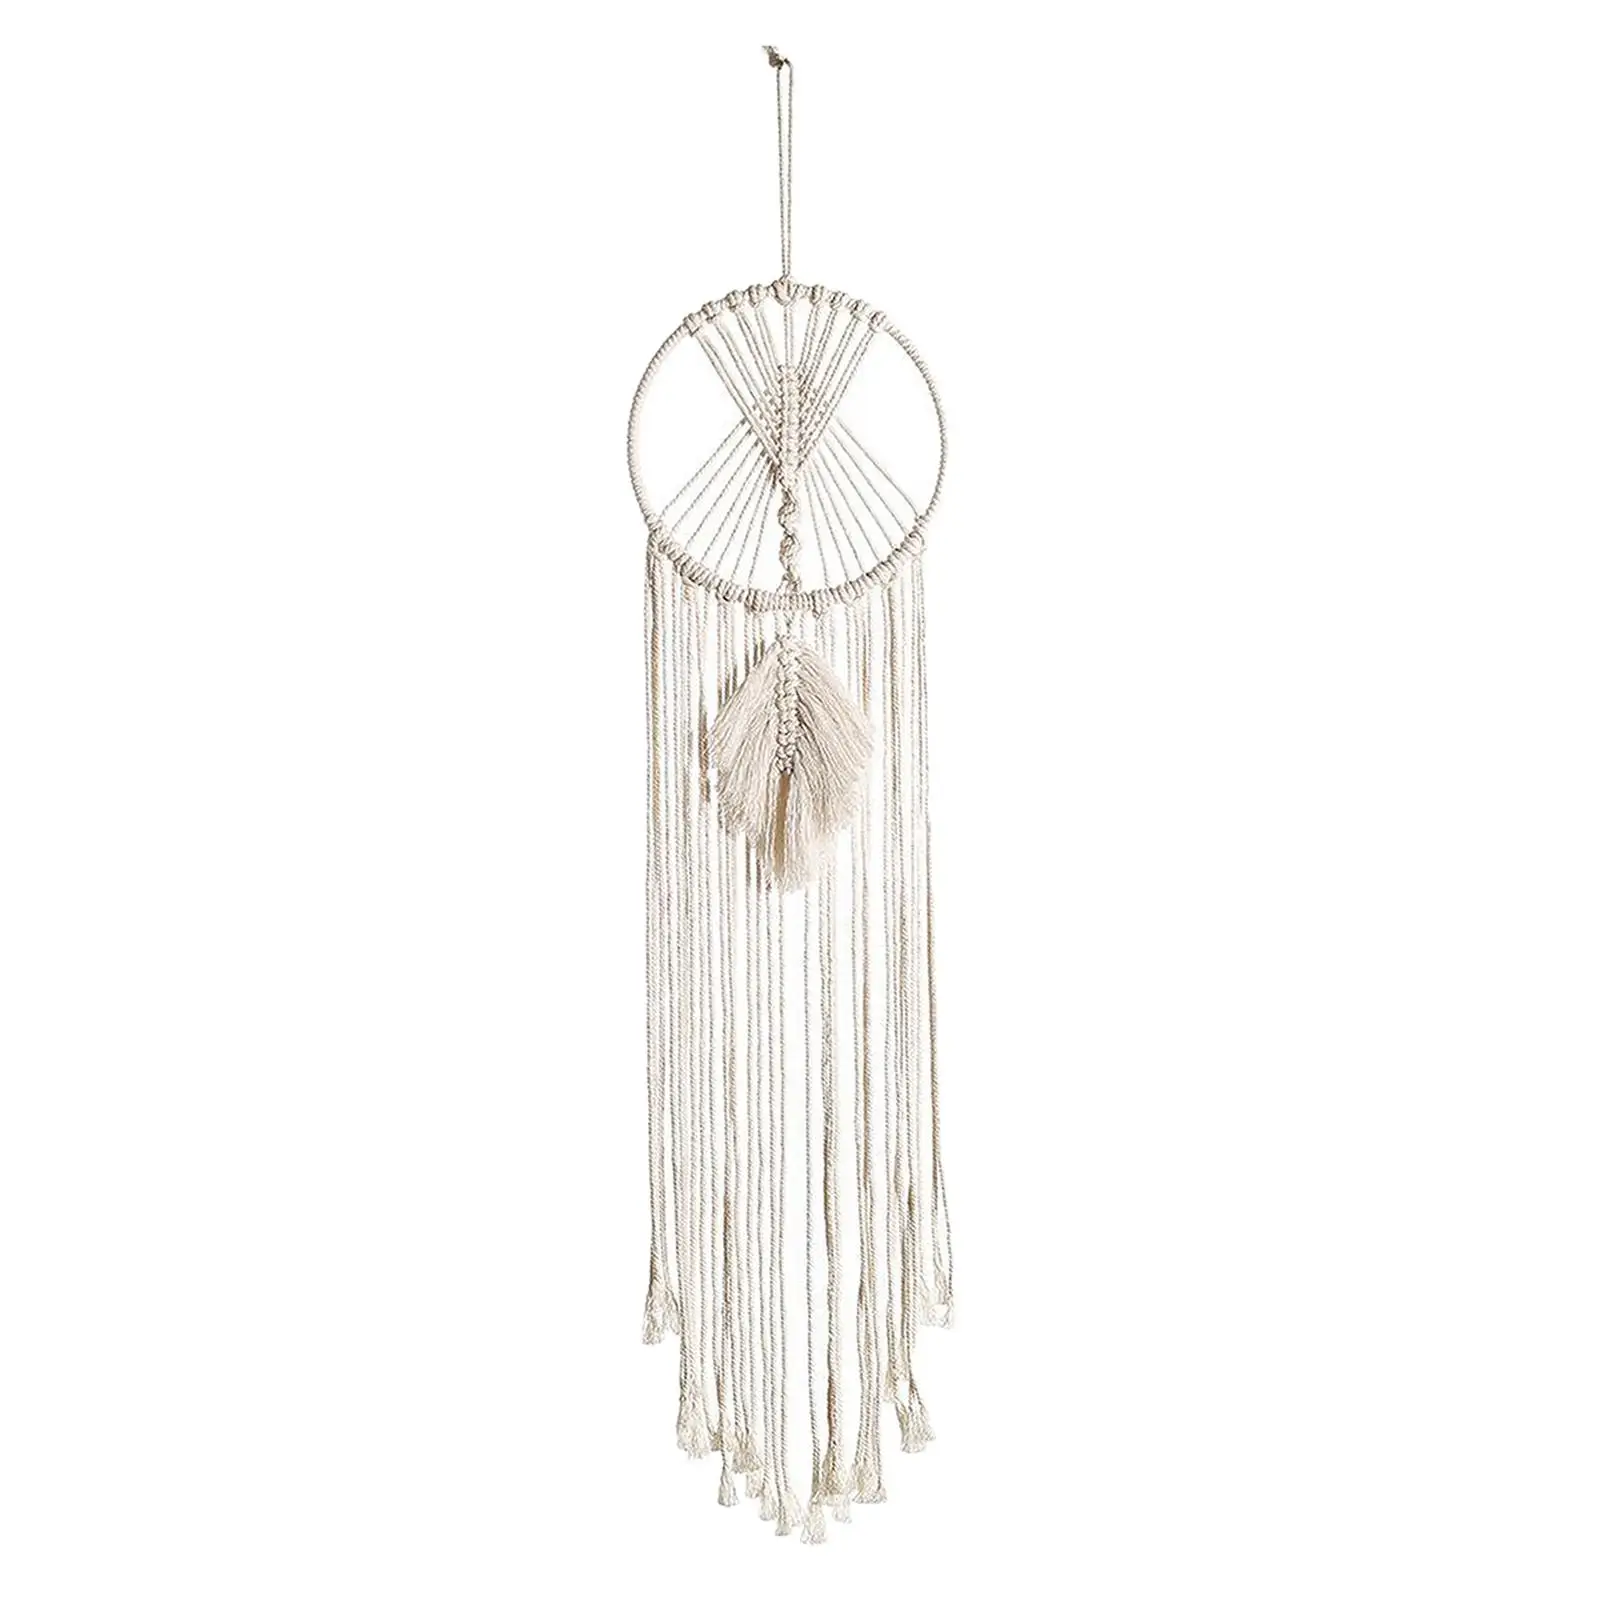 Weave Dream Catcher with Circle Boho Dreamcatcher Cotton Wall Hanging Ornament